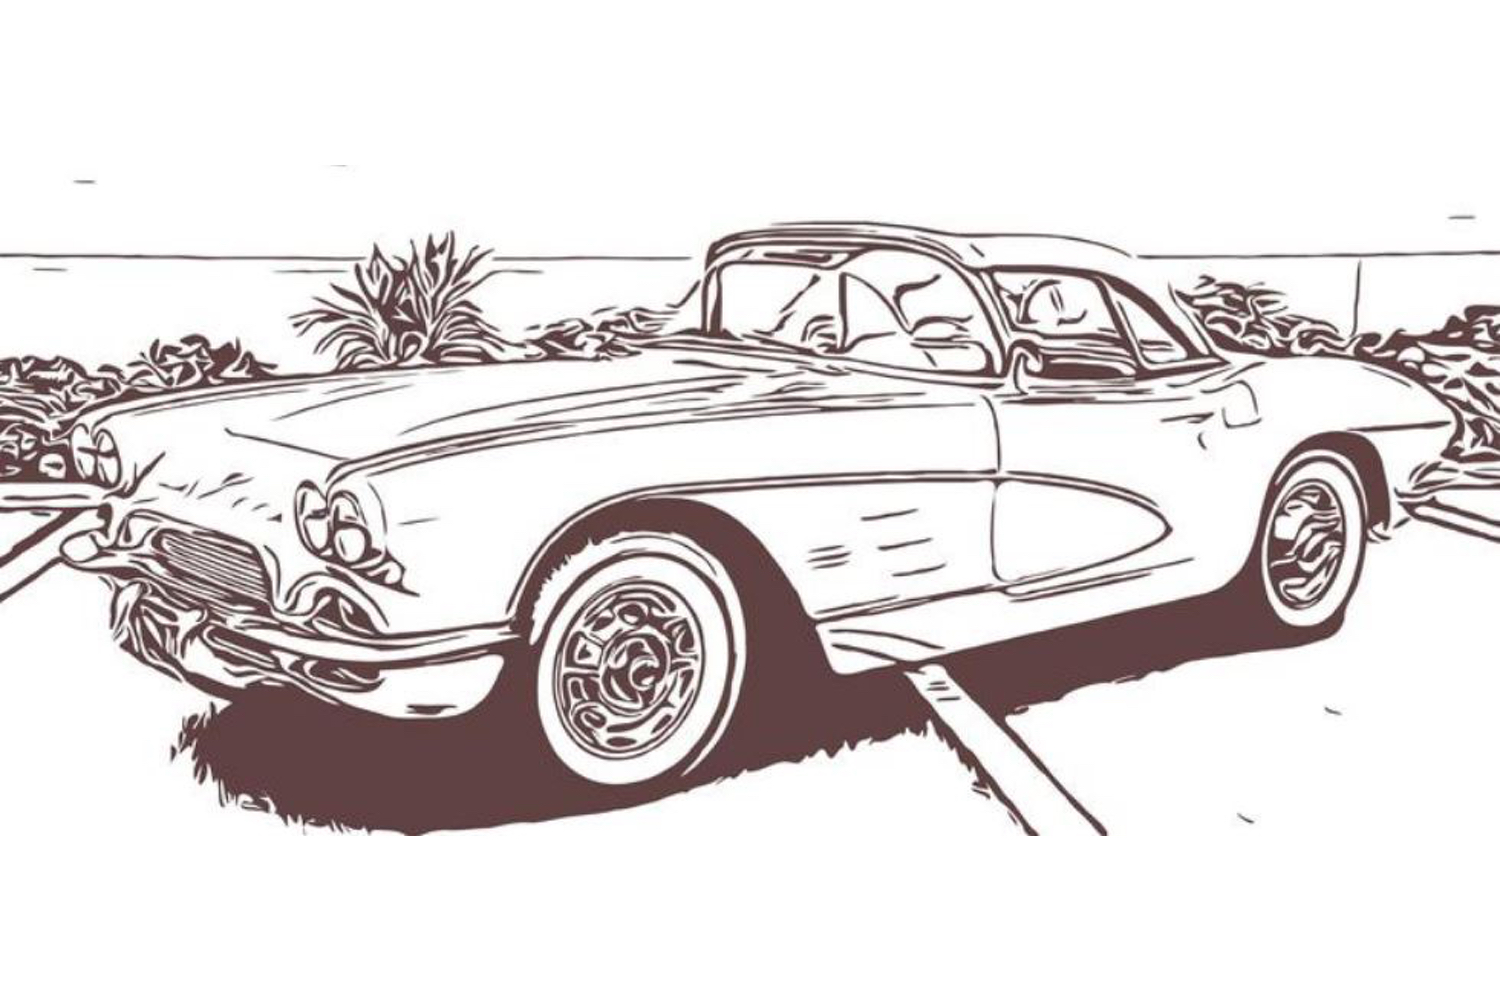 100 Free Coloring Page Of A 1953 Chevrolet Corvette Color In This